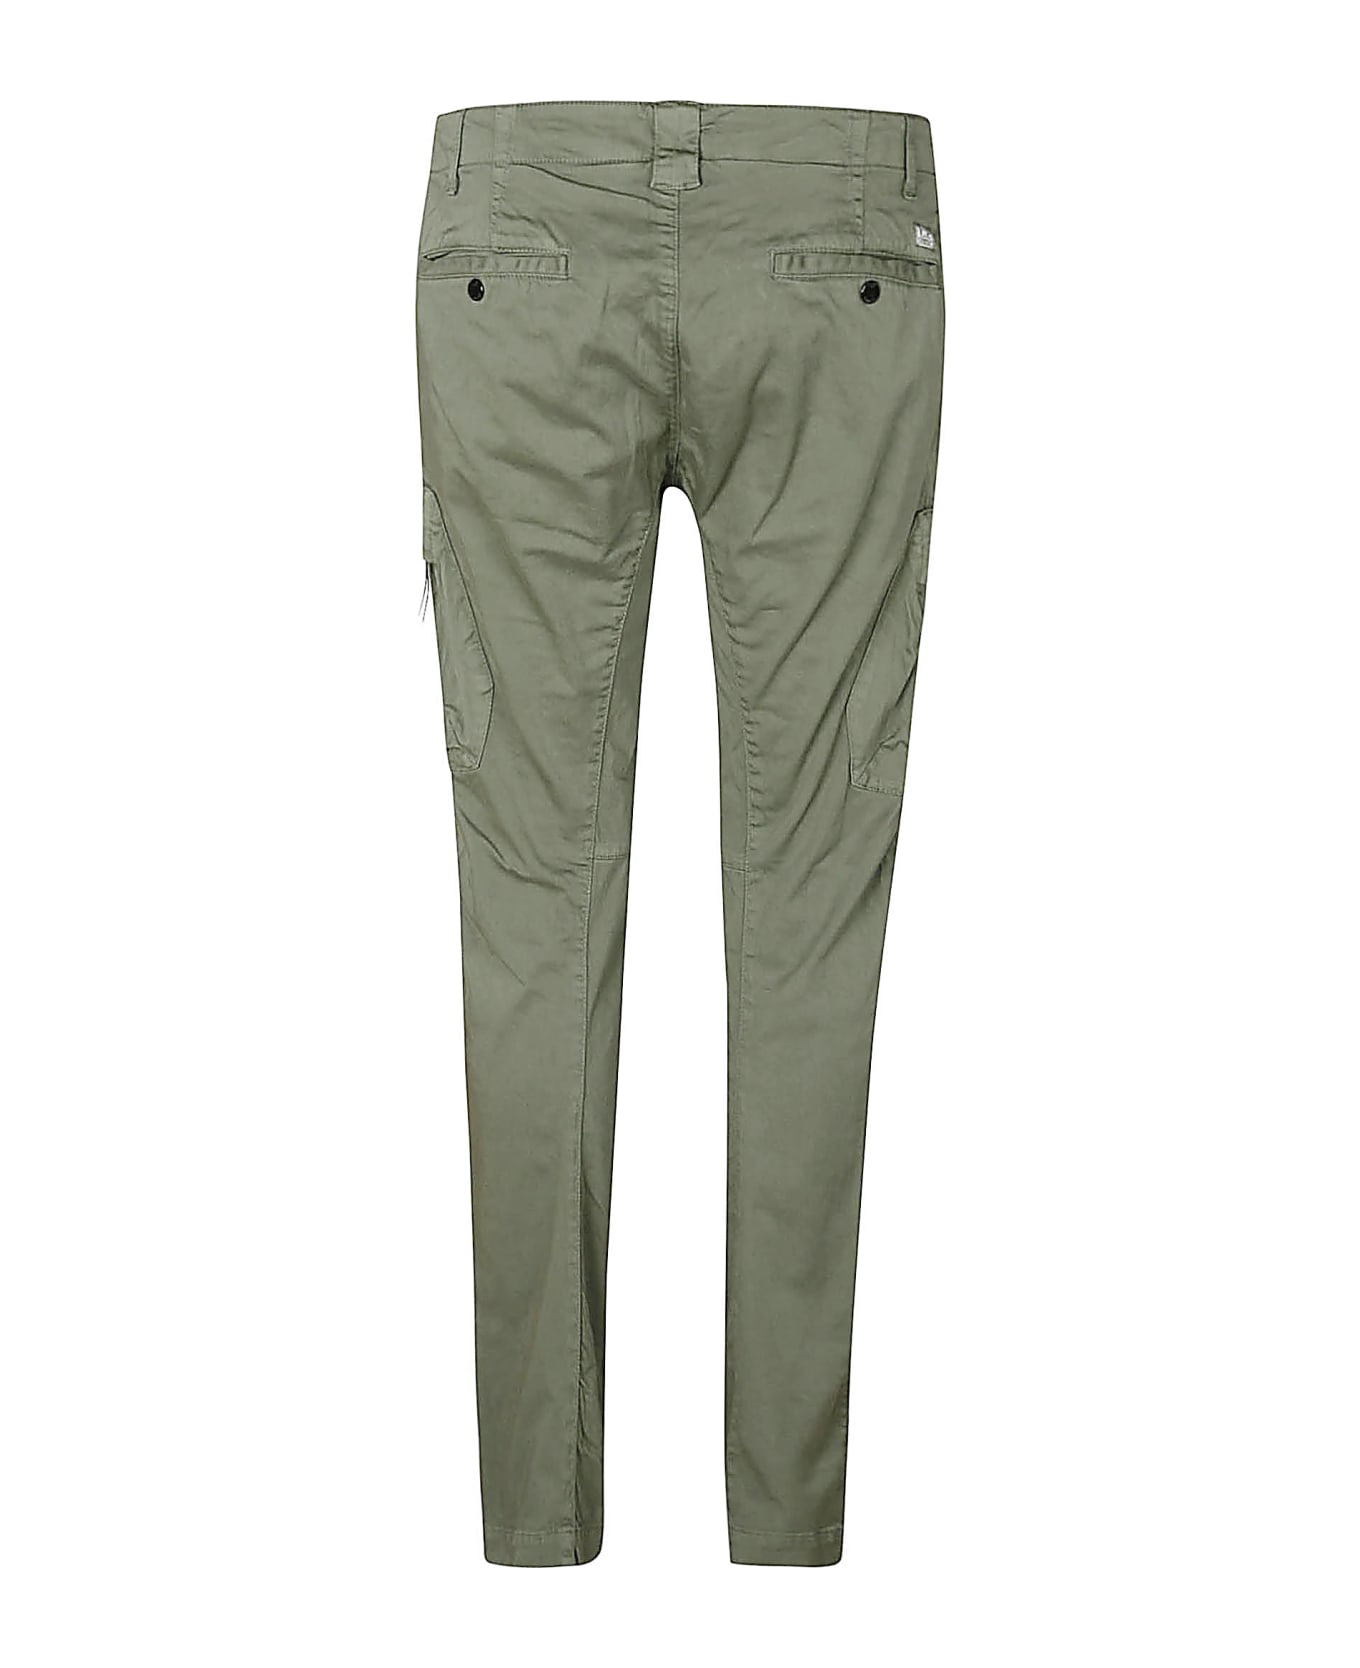 C.P. Company Satin Stretch Cargo Pants - Agave Green